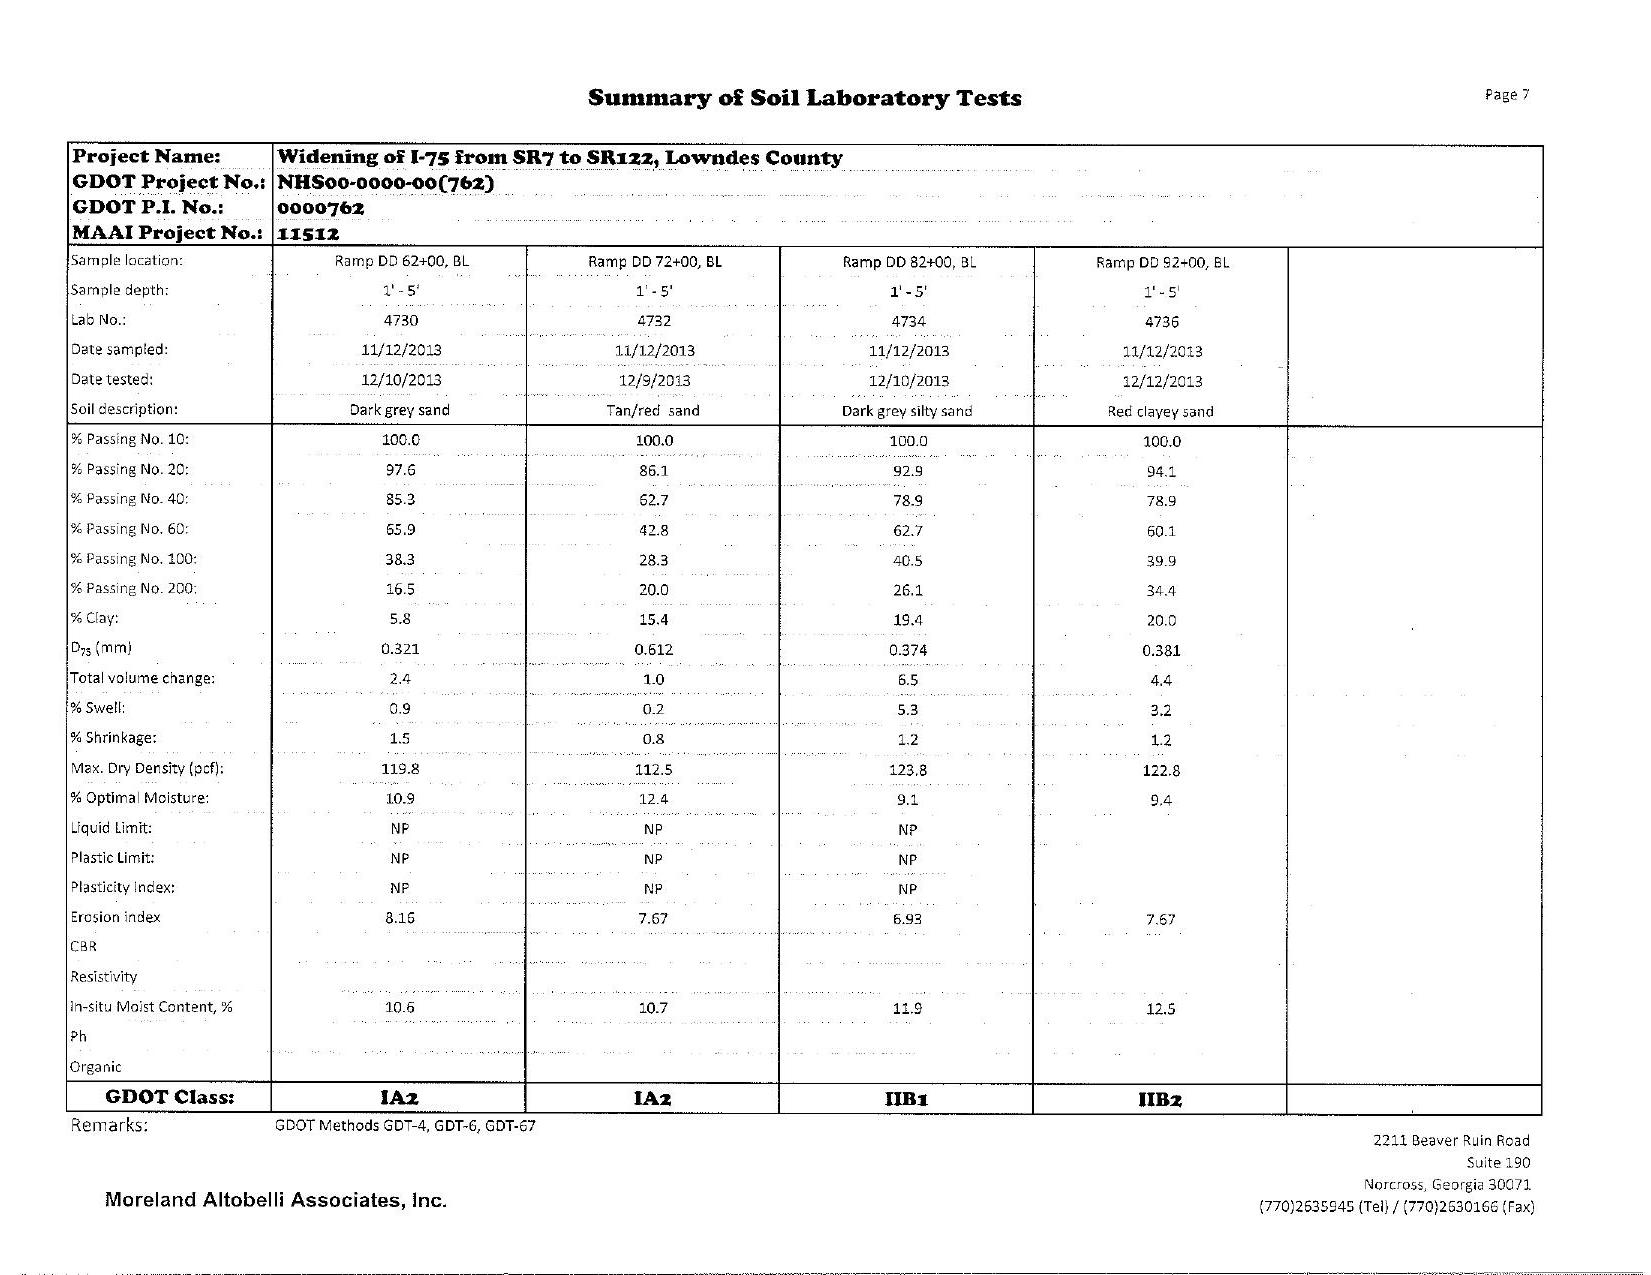 Summary of Soil Laboratory Tests (7 of 9)